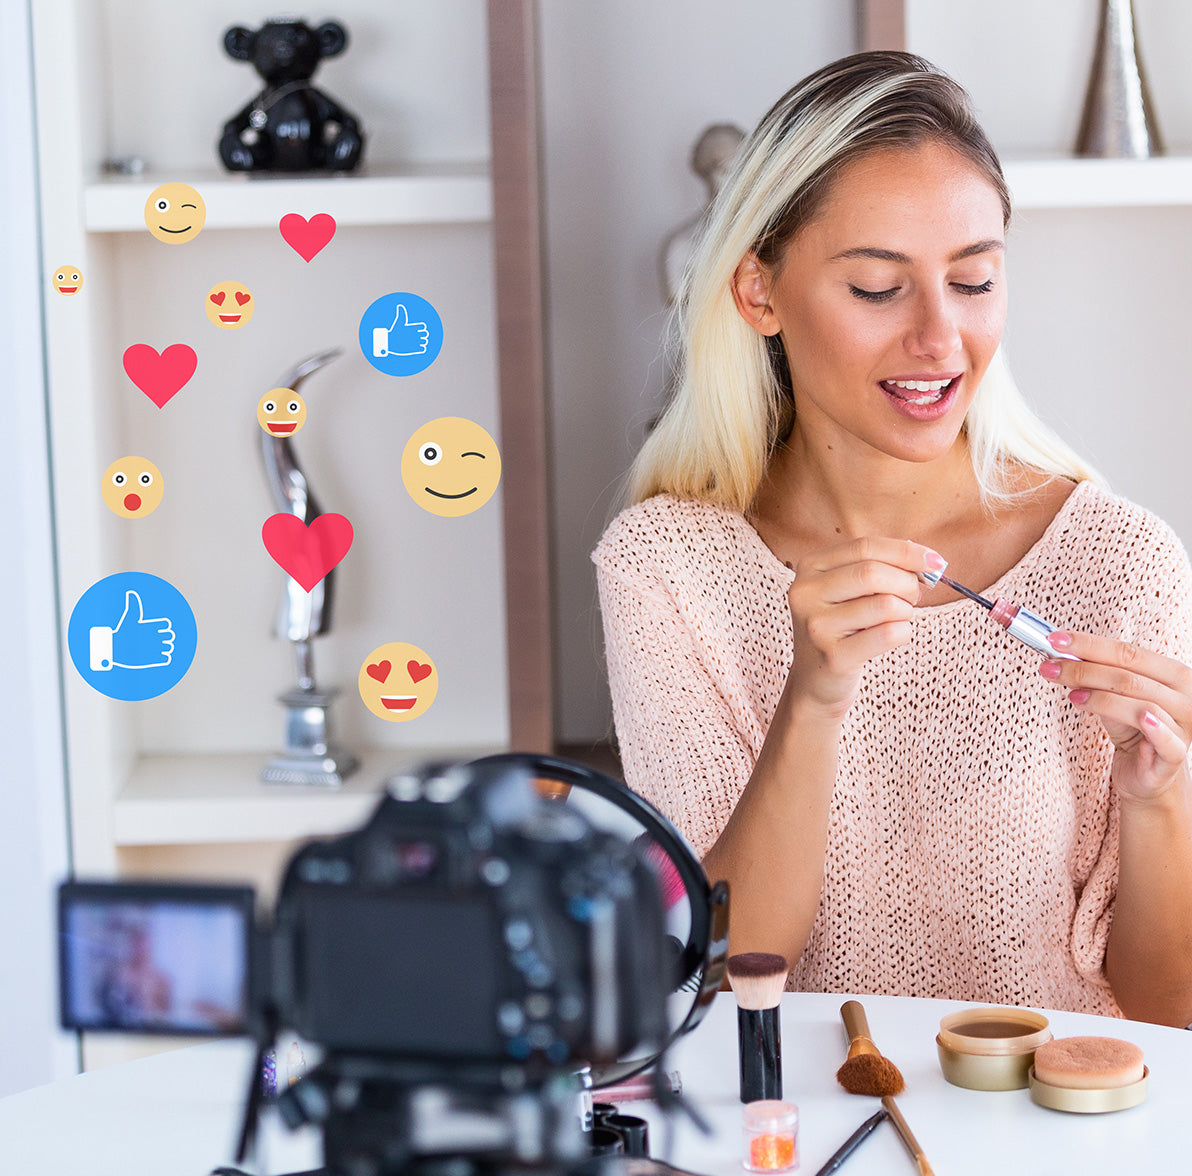 Woman filming herself putting on makeup. Emojis and heart icons floating around camera.